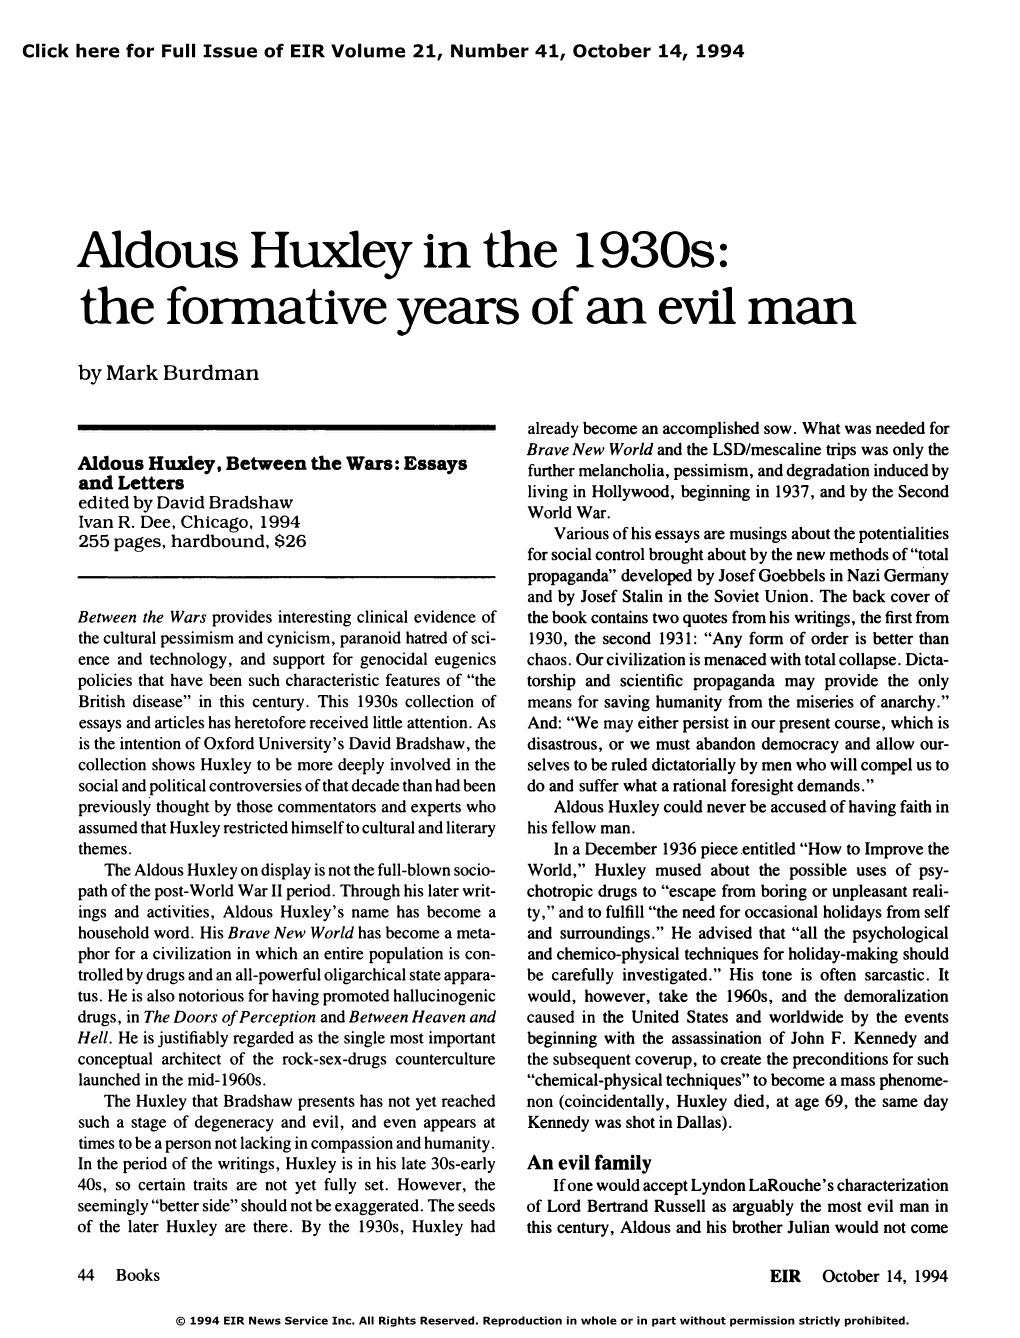 Aldous Huxley in the 1930S: the Formative Years of an Evil